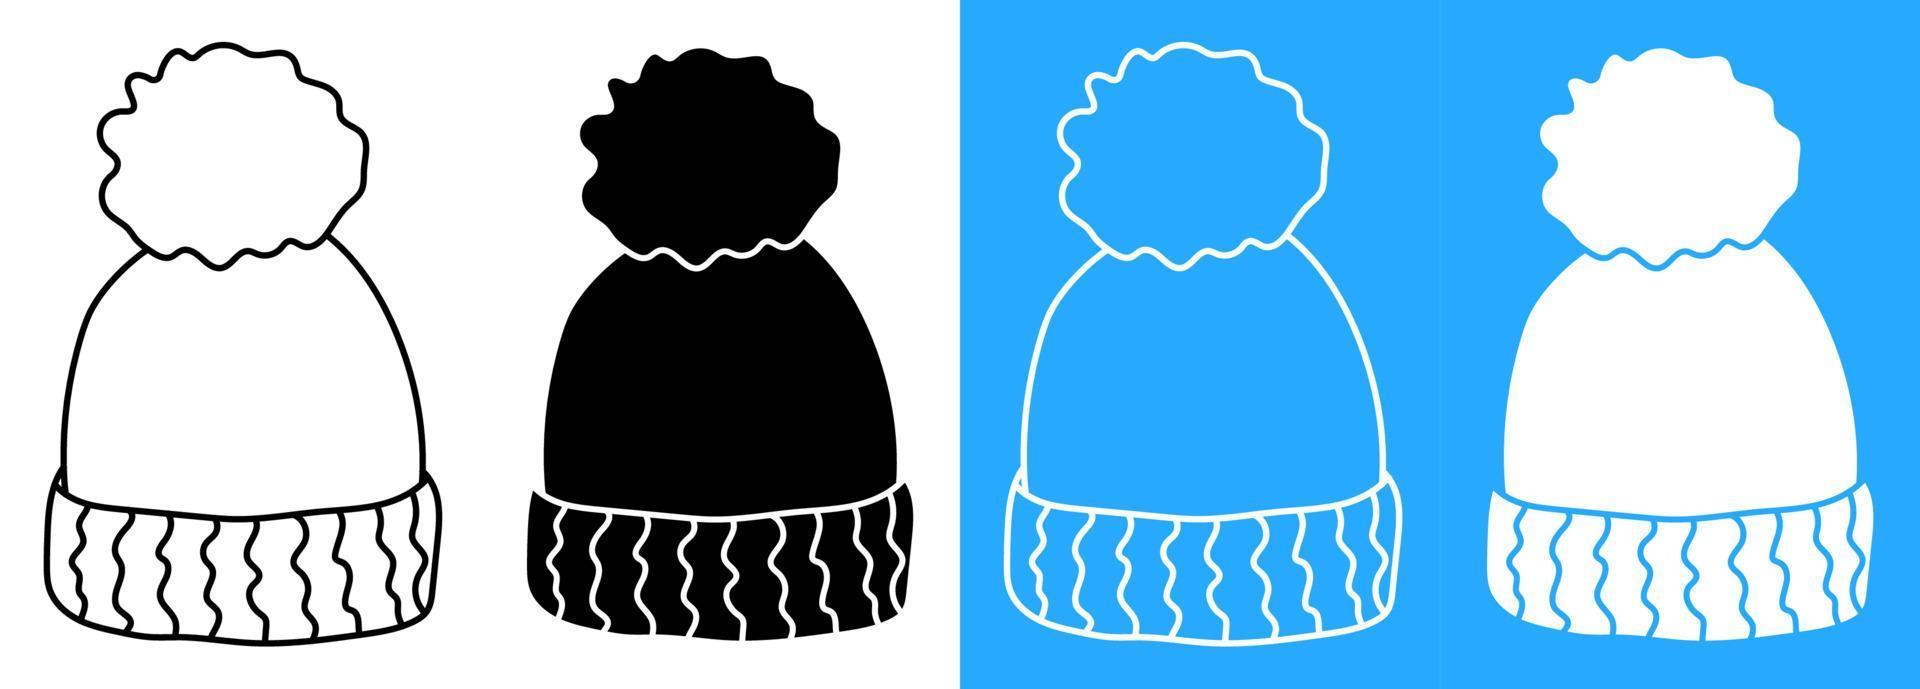 winter warm knitted wool hat. Winter clothing for cold weather. Caring for the health of children. Vector icon